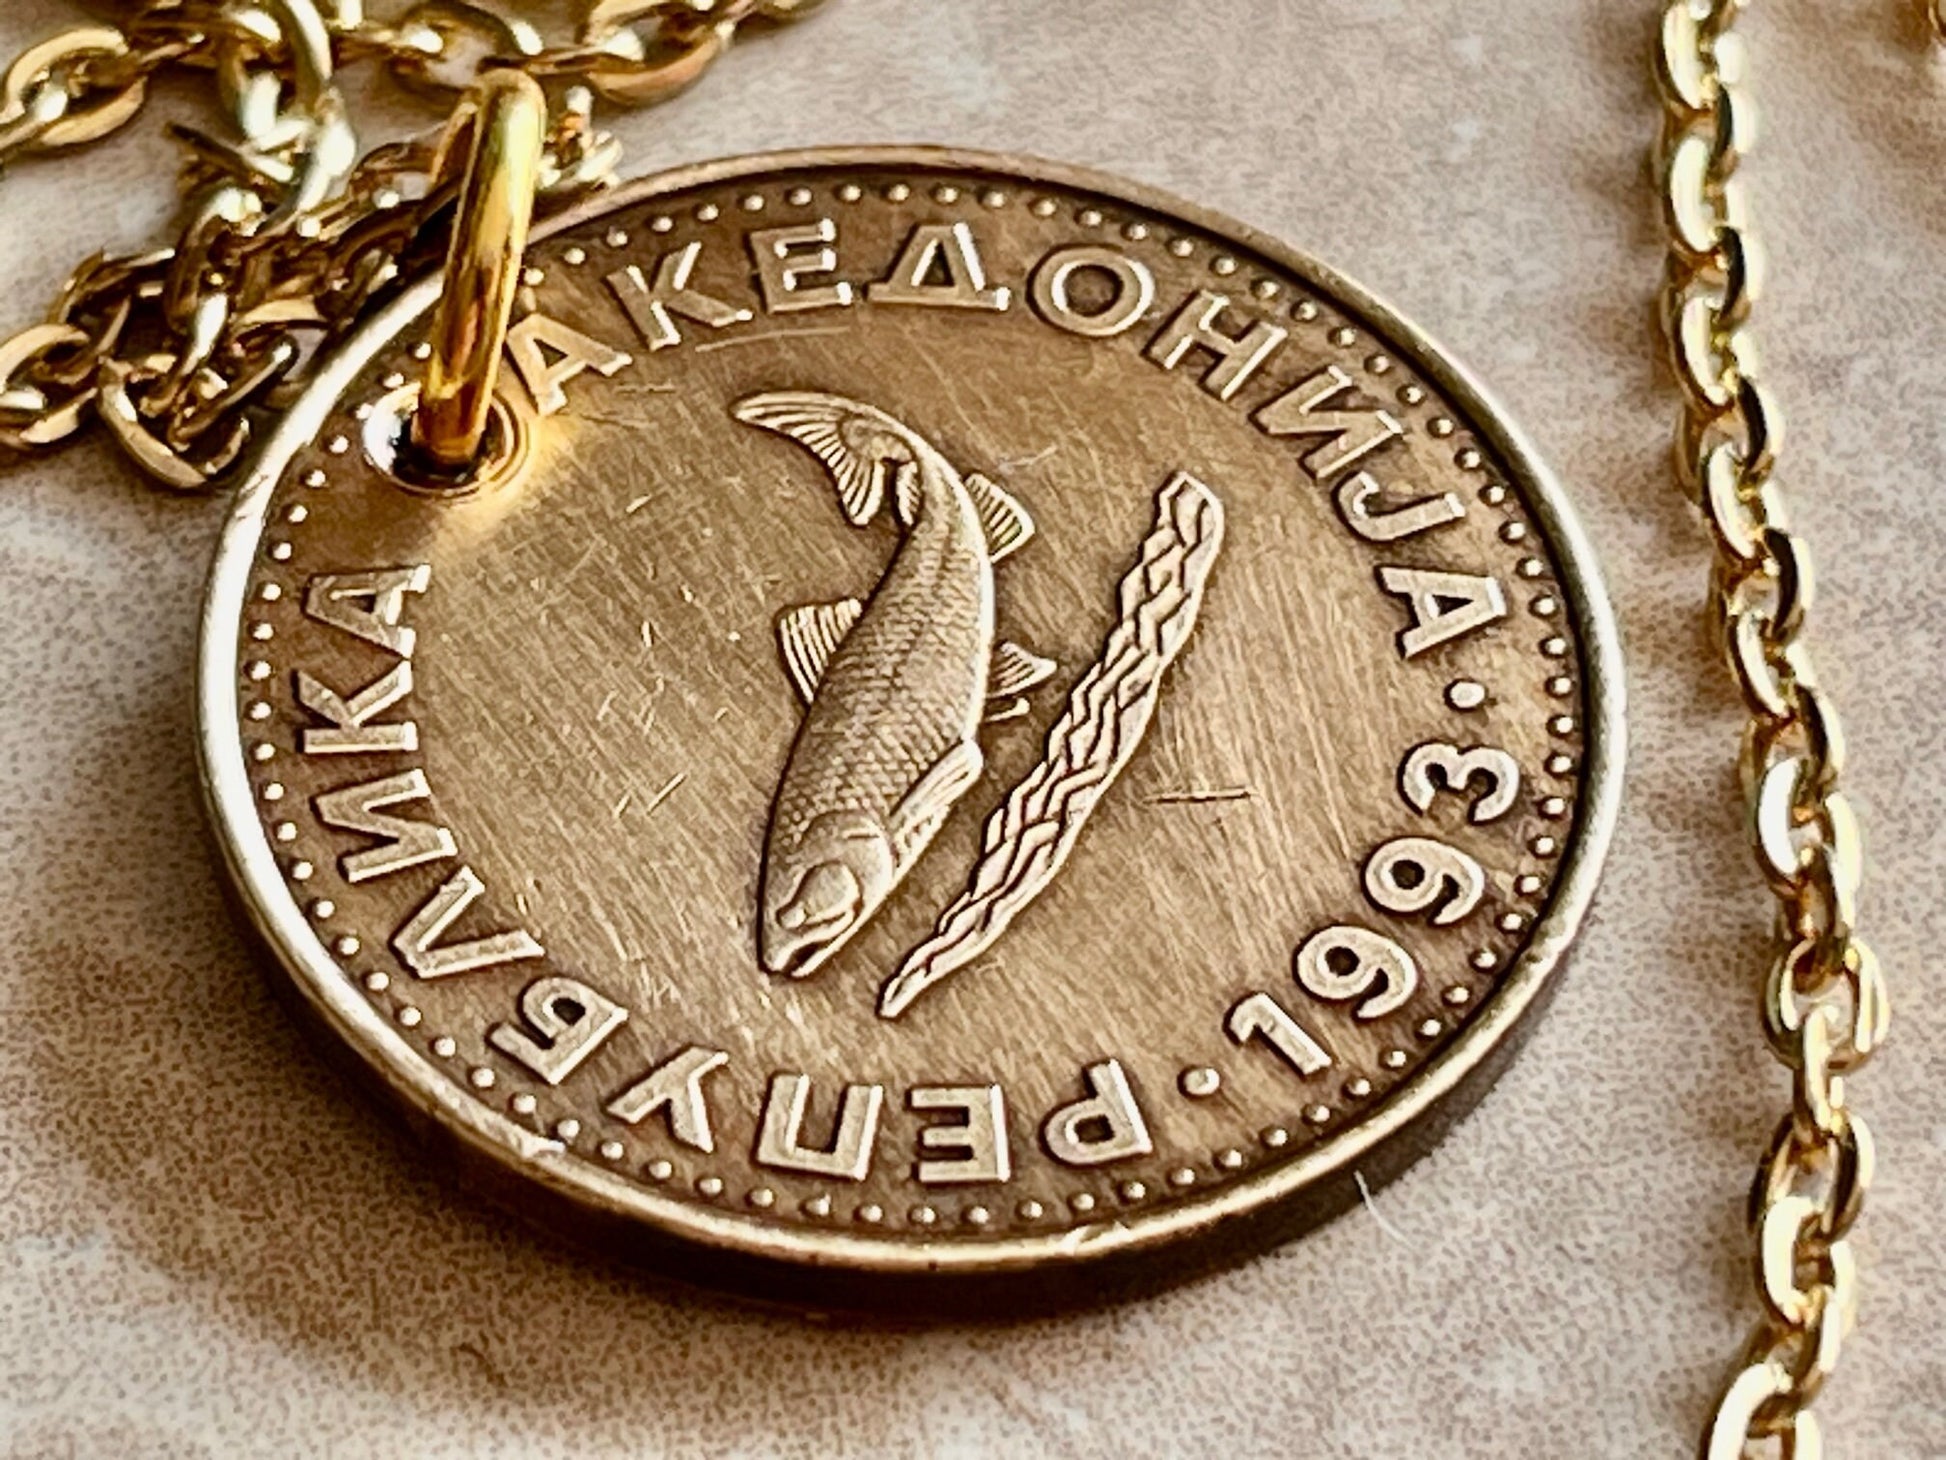 Macedonian Republic 2 Denier Coin Necklace Pendant Custom Charm Gift For Friend Coin Charm Gift For Him, Her, Coin Collector, World Coins